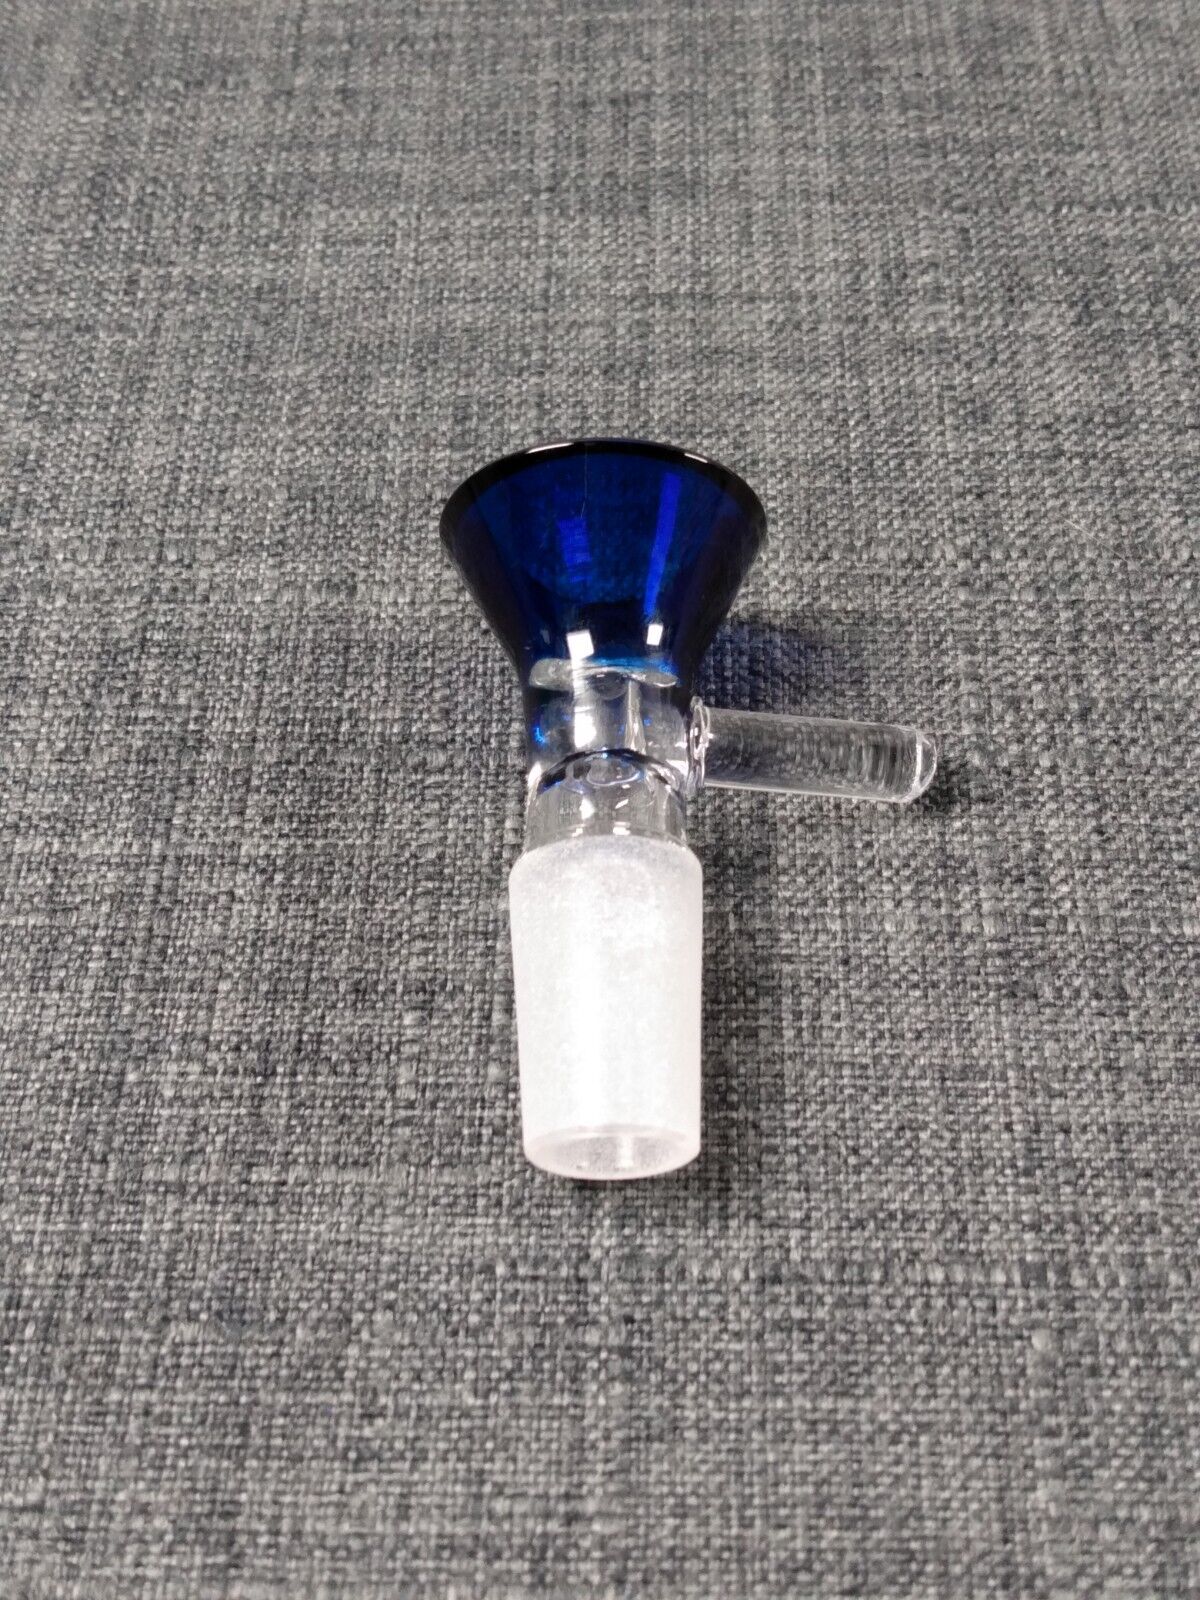 14mm Glass Bowl For Bong Hookah Water Pipe, Replacement part (BLUE)